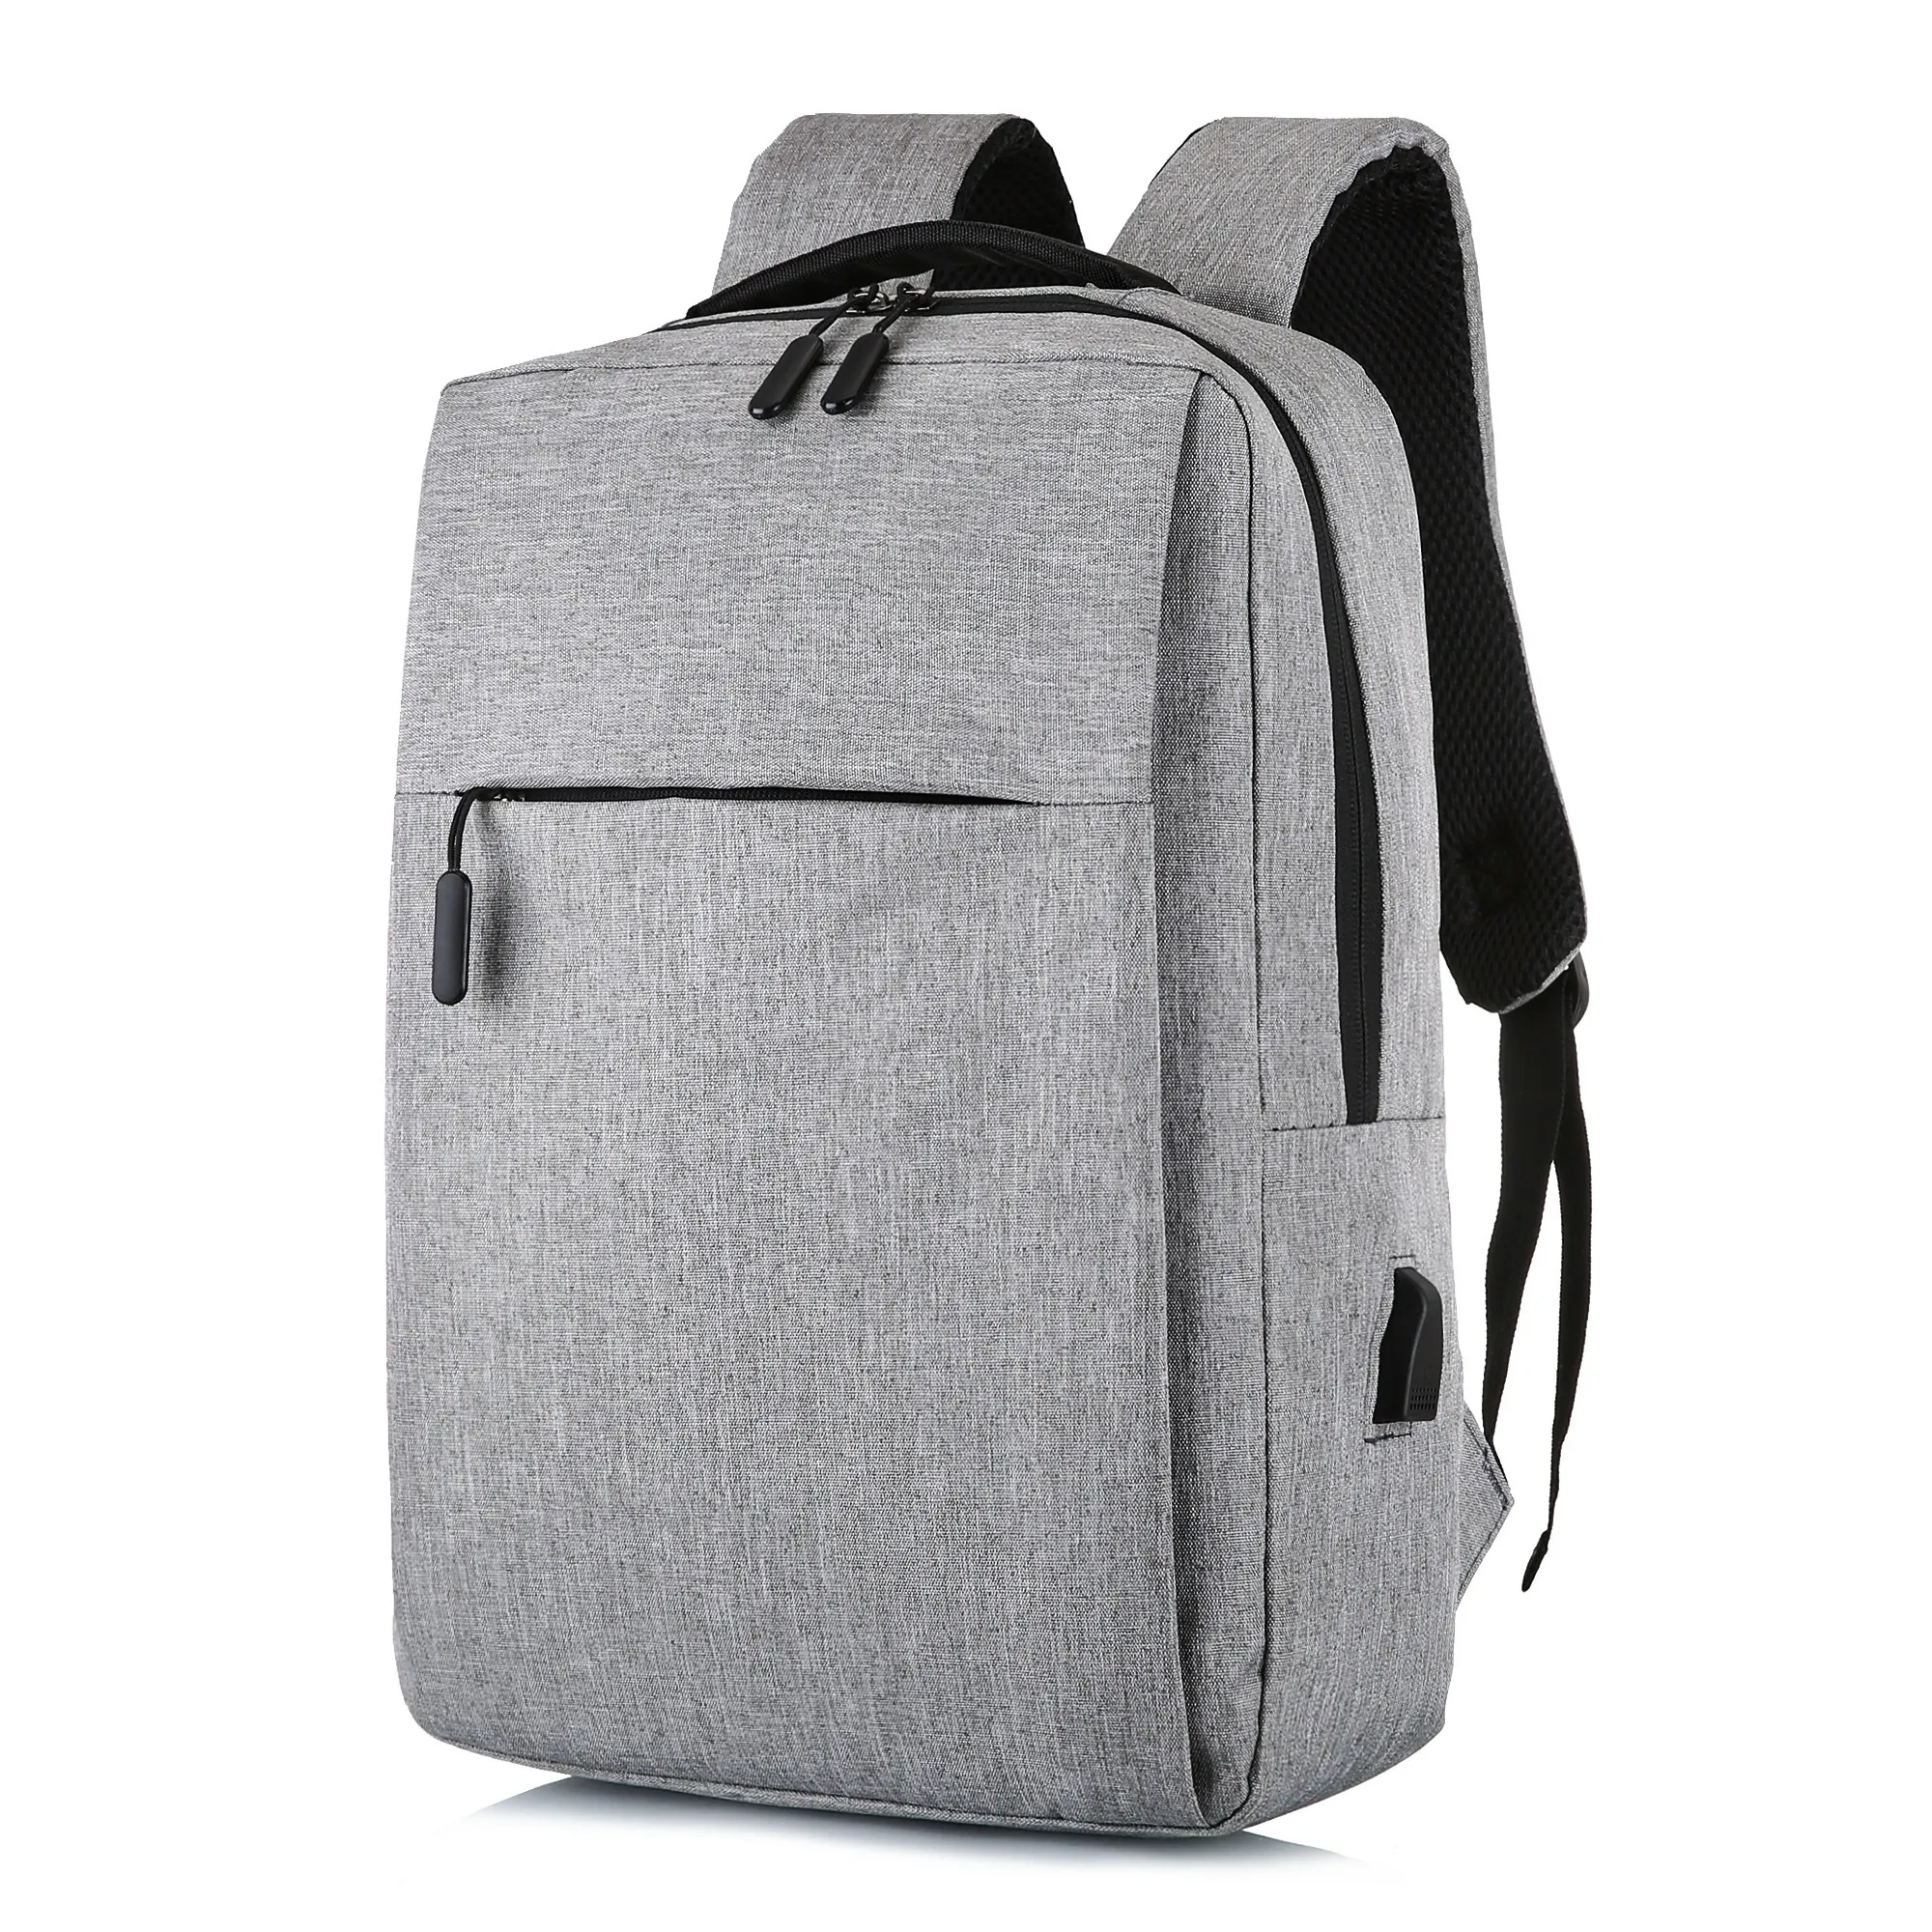 New Design Comfortable Large Capacity High Quality Light Weight Best Design 2022 Backpack Bags For Adults